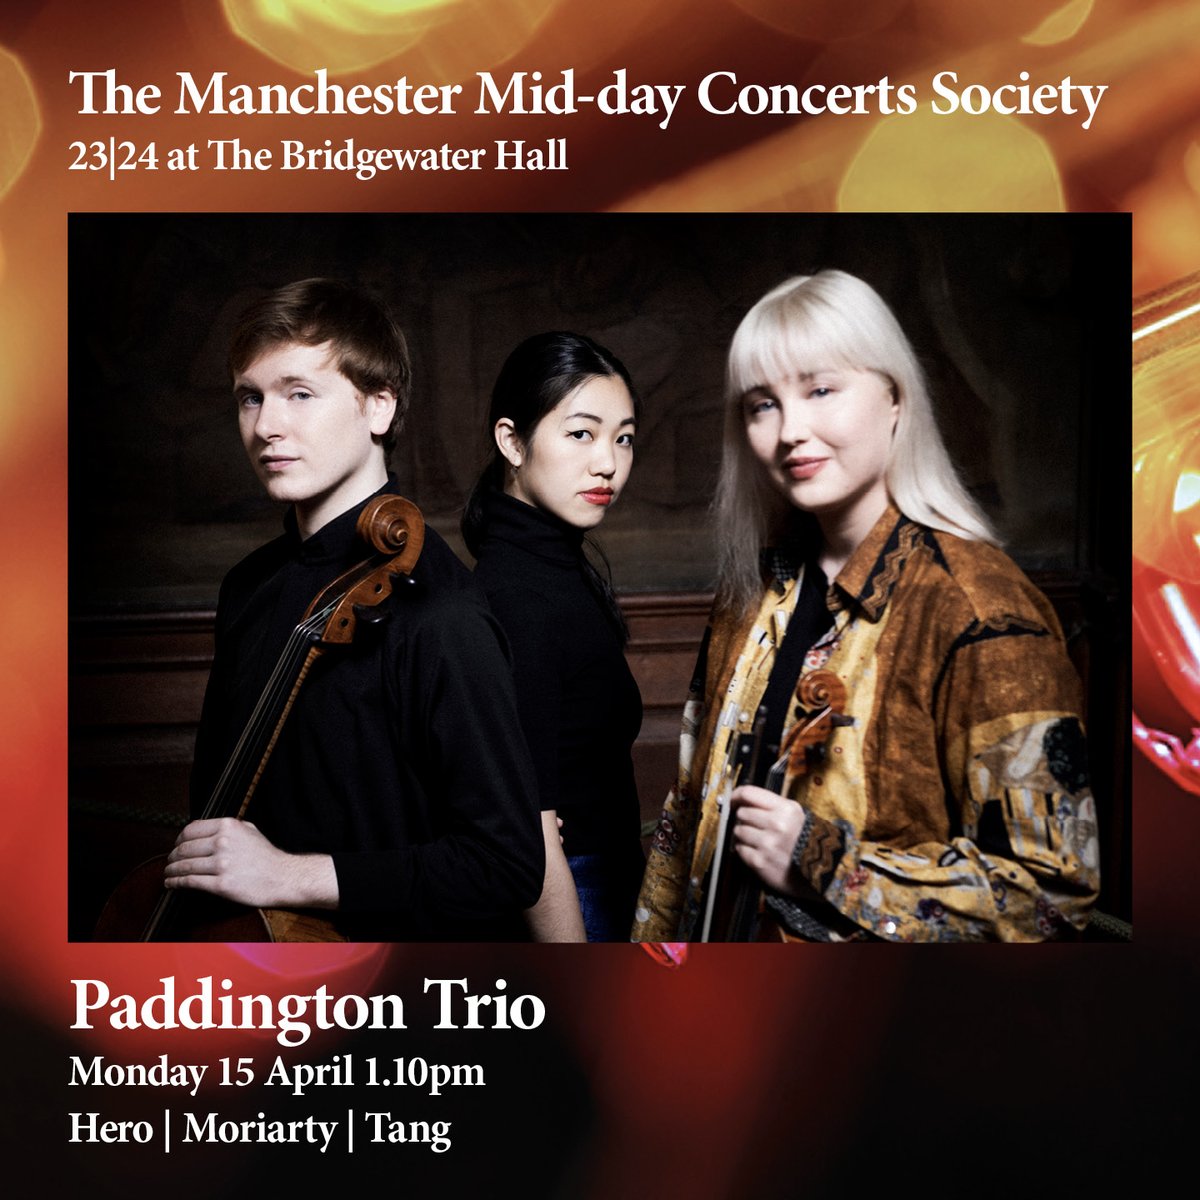 COMING UP // The @PaddingtonTrio will be with us next Monday for the latest Manchester Midday! Music starts at 1.10pm or join us for lunch at our Stalls Café Bar, which serves soup, sandwiches and a selection of hot meals from 11am til 2.30pm 🍽 🎟 bridgewater-hall.co.uk/whats-on/manch…